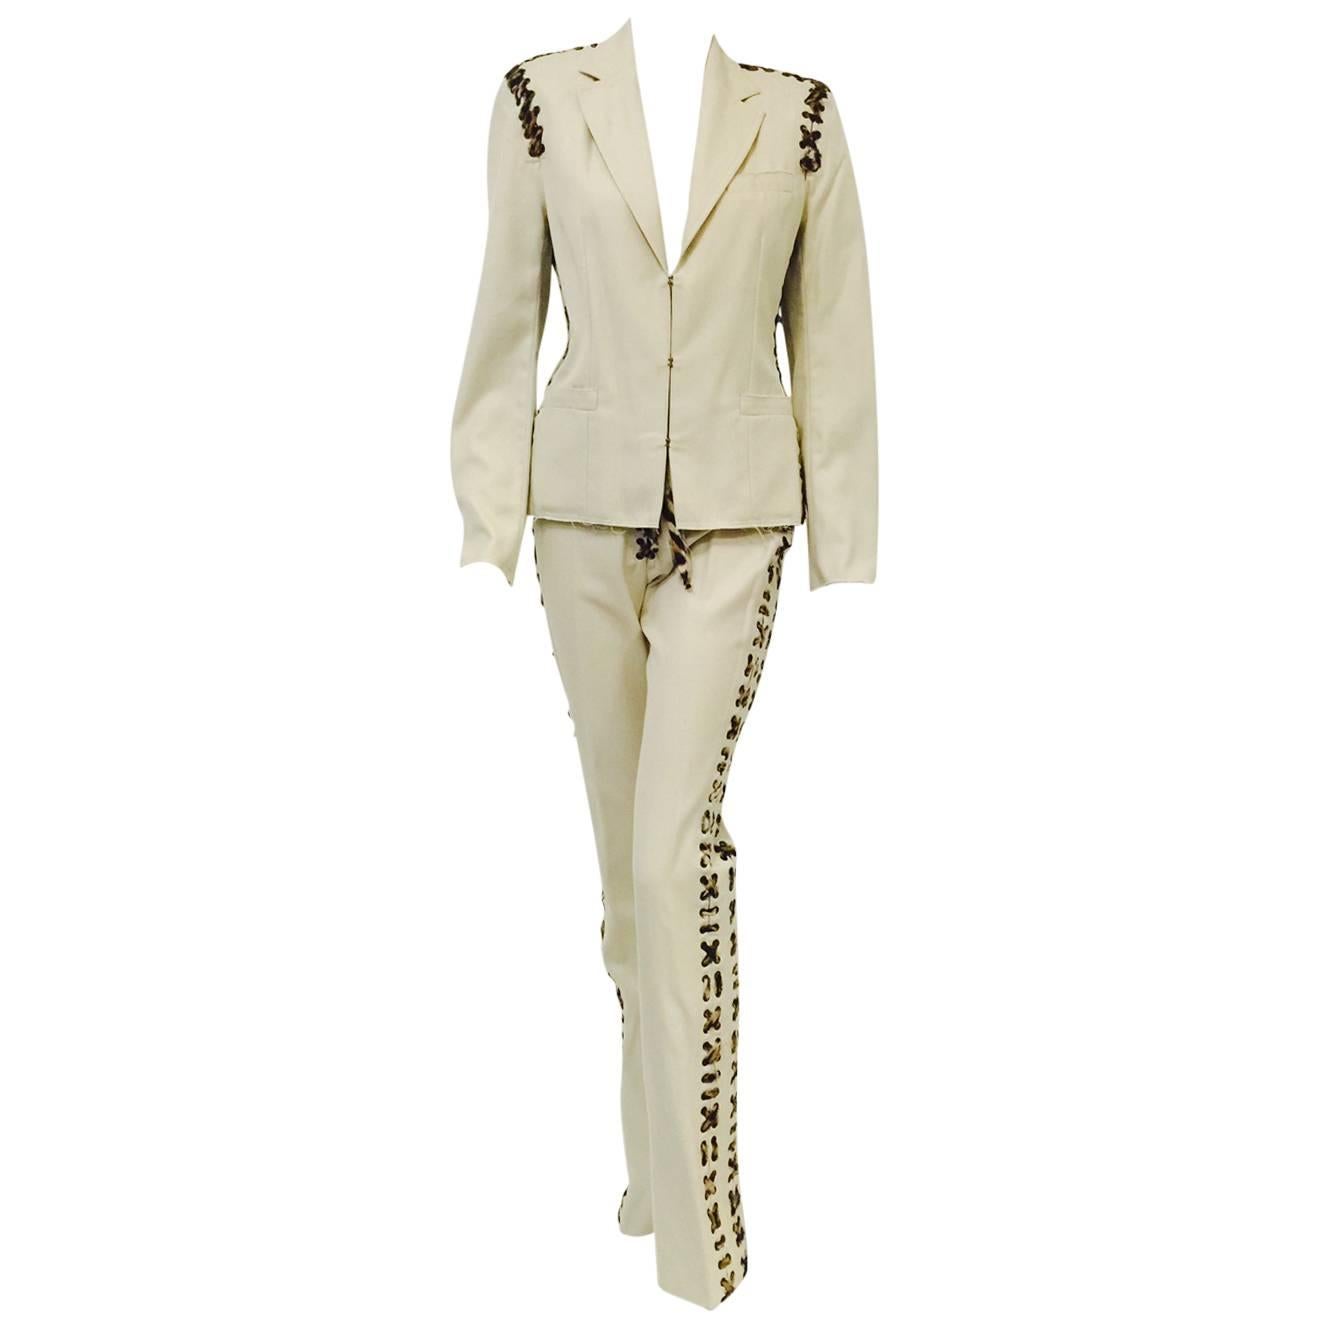 Iconic 2002 Tom Ford for Yves Saint Laurent Rive Gauche Mombasa Pant Suit 